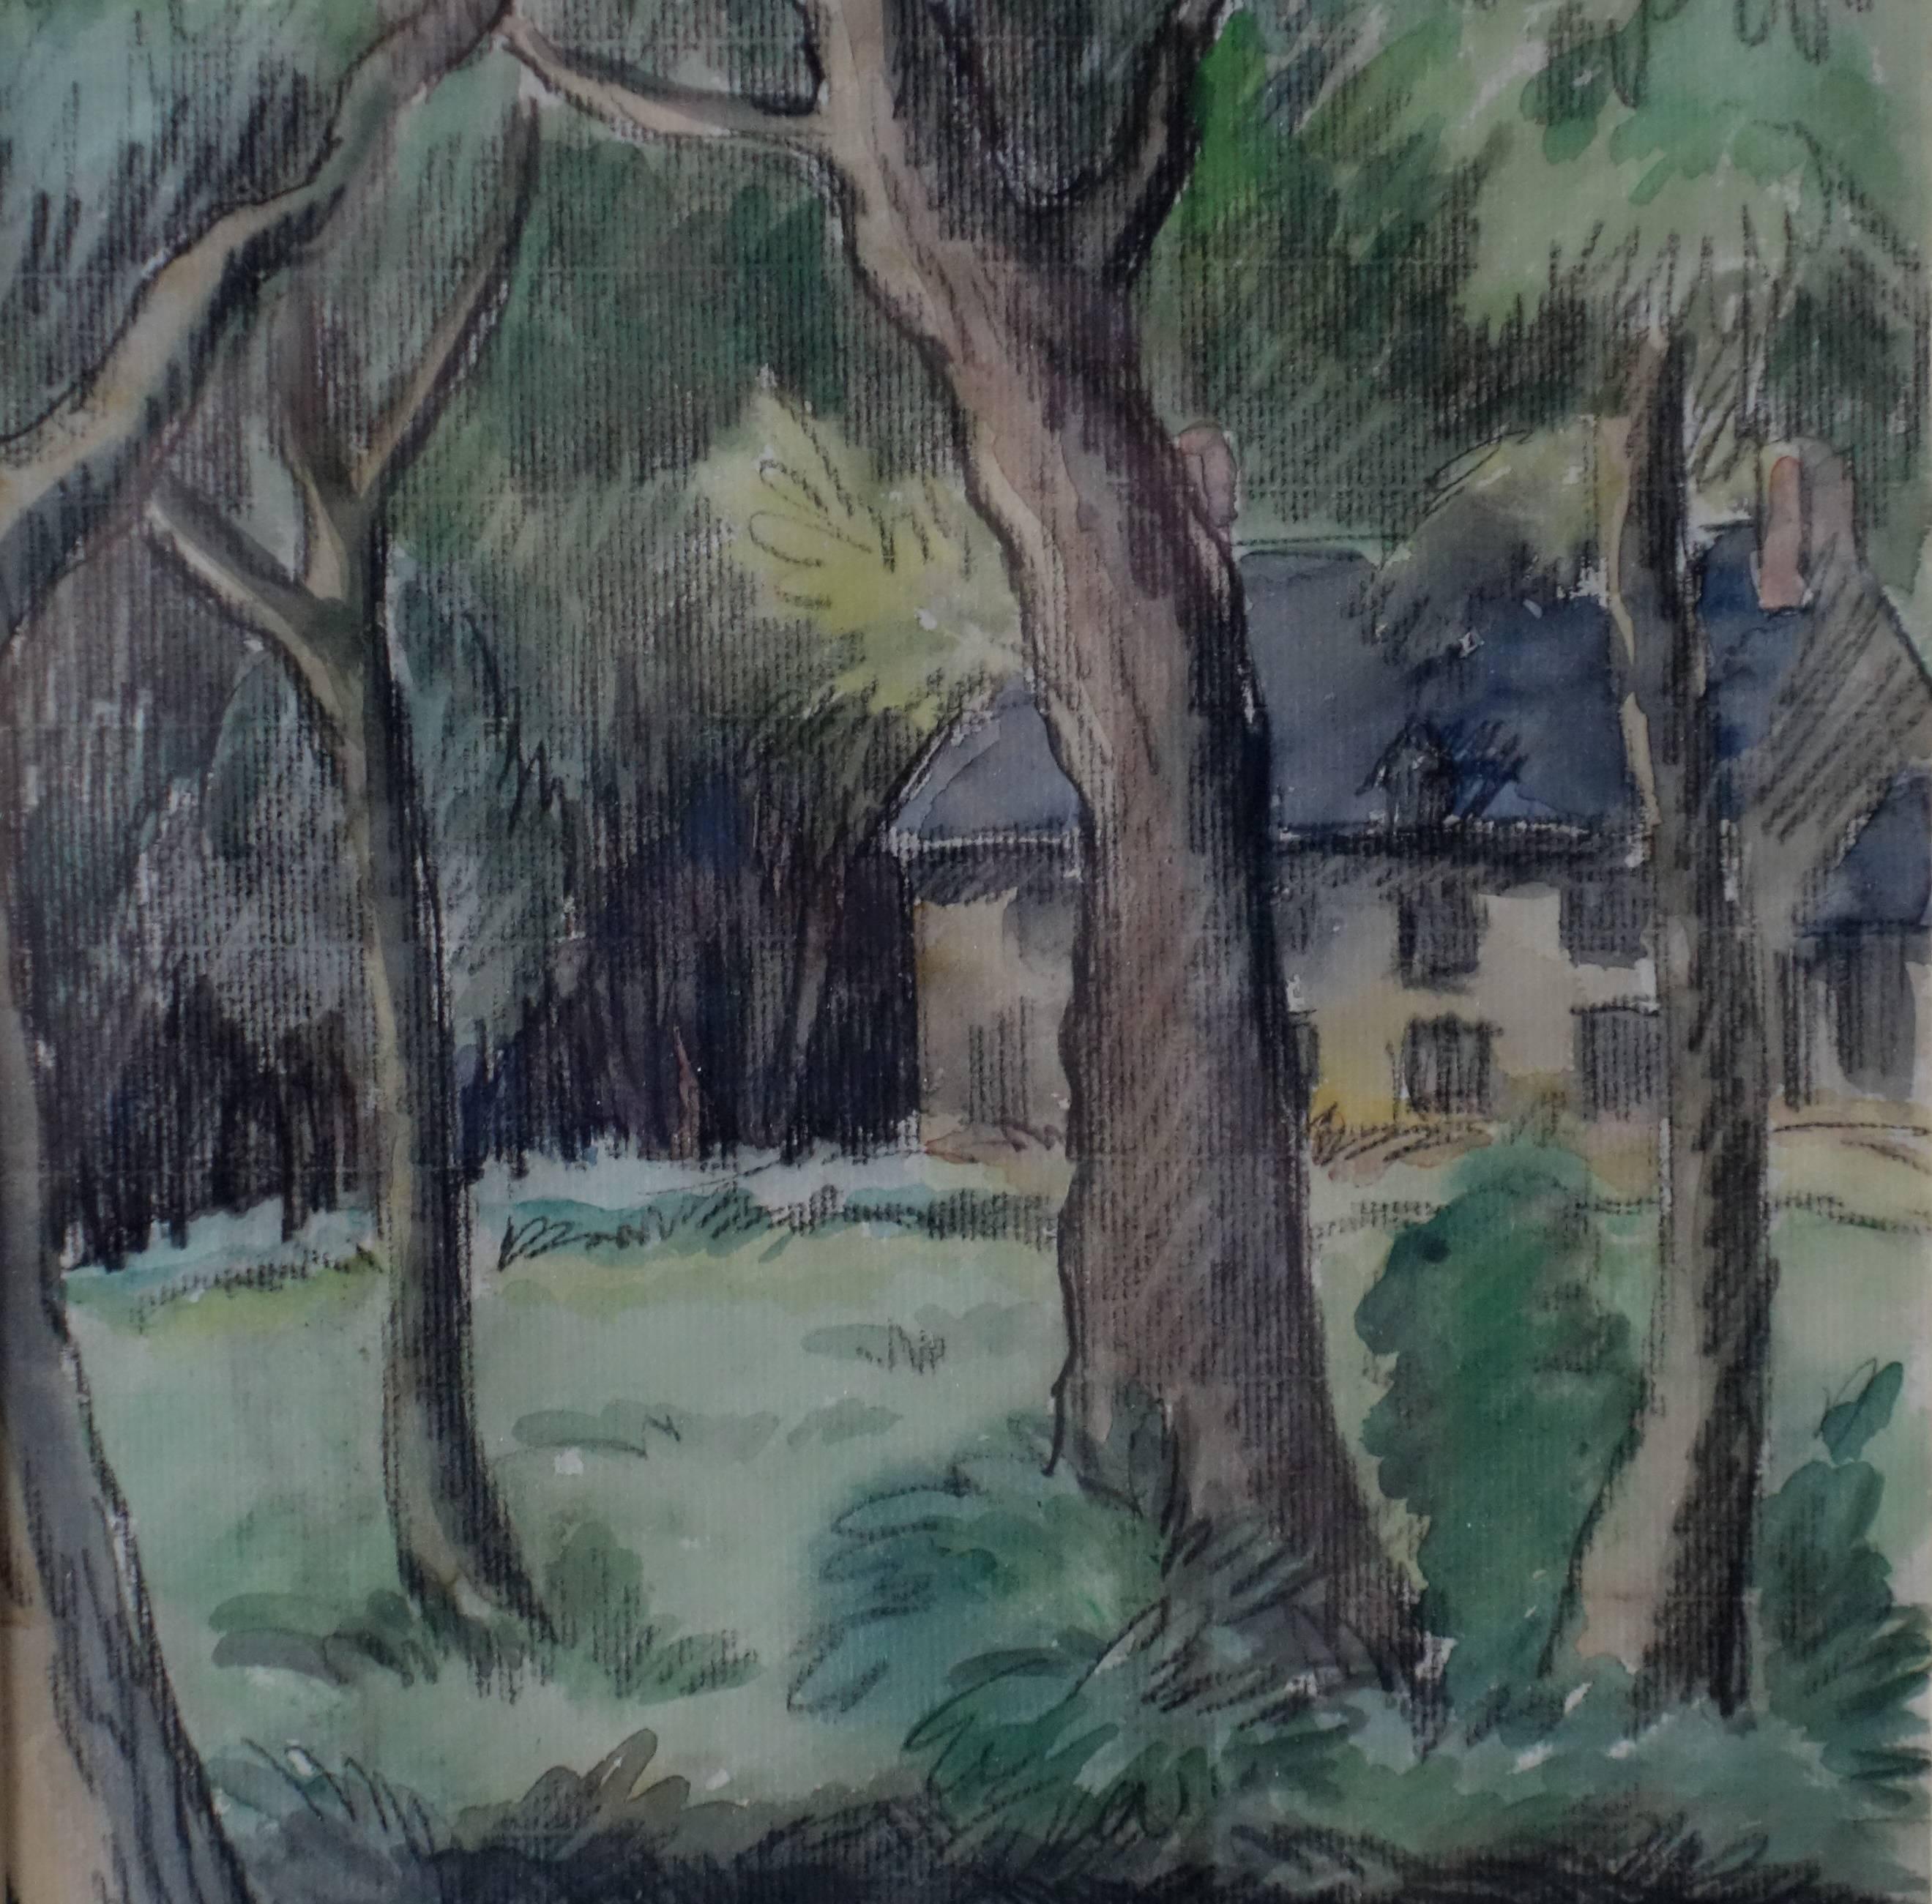 Paul Emile PISSARRO (1884-1972)
The House Near the River

Original watercolor and charcoals painting
Handsigned in the upper left corner
On vellum 30 x 22.5 cm at view (c. 12 x 9 in)
Presented in a golden wood frame 50 x 41 cm (c. 20 x 16